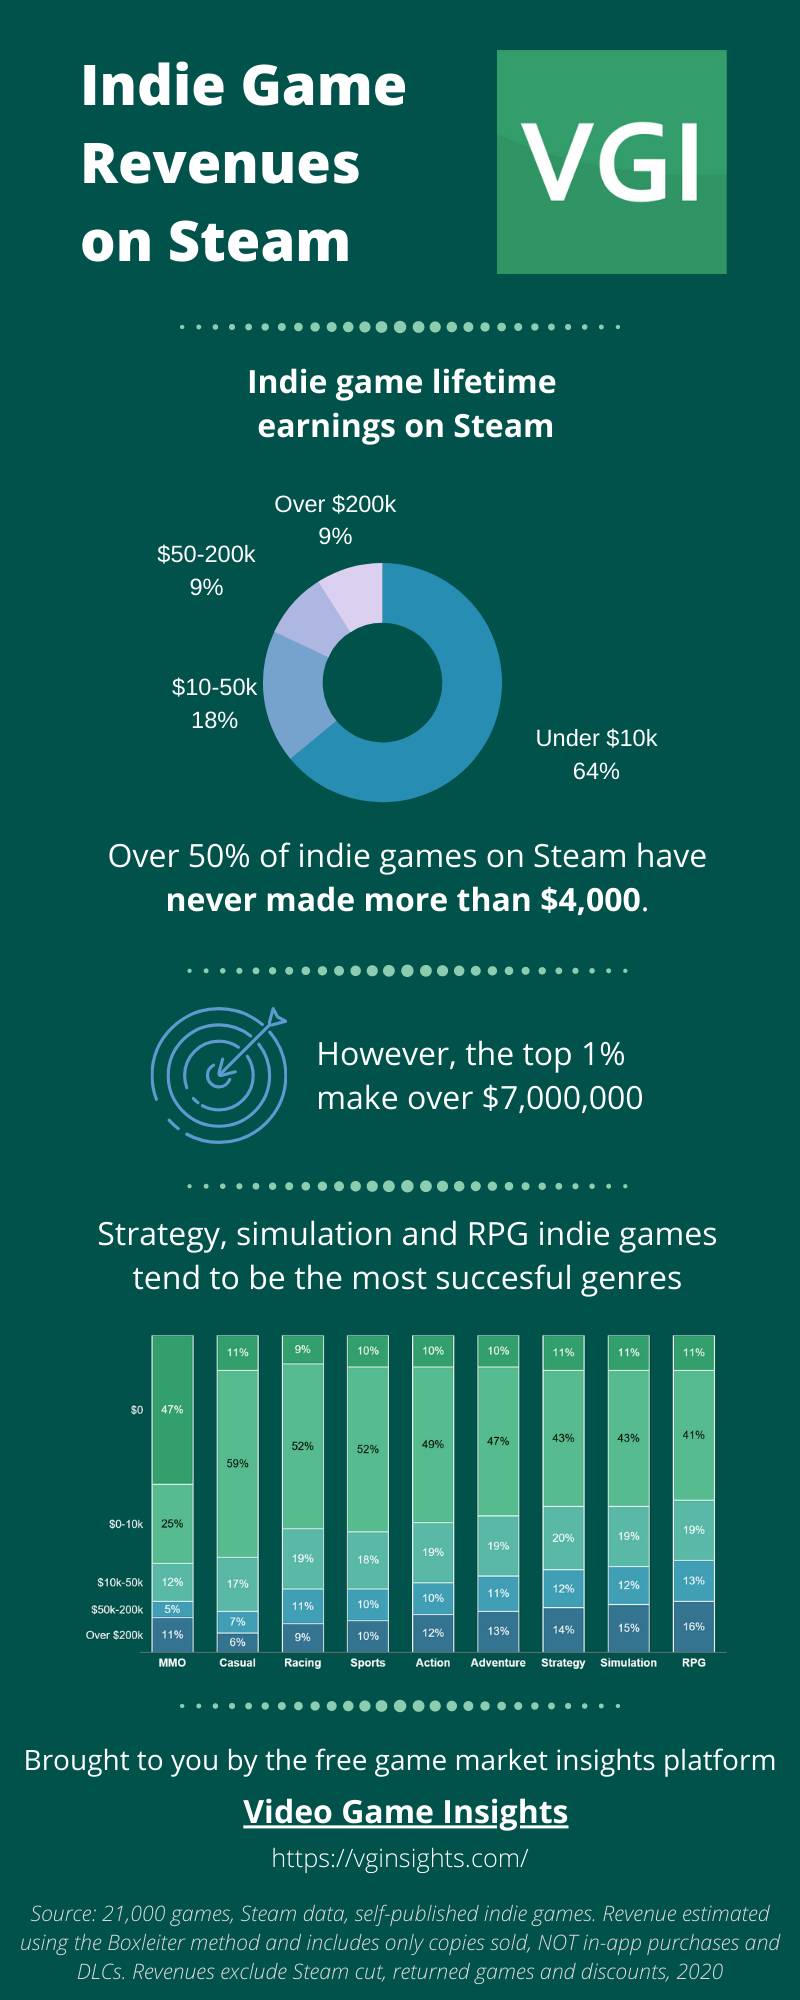 Video Game Insights - Indie game revenues on Steam, including genre lifetime earnings and genre splits.